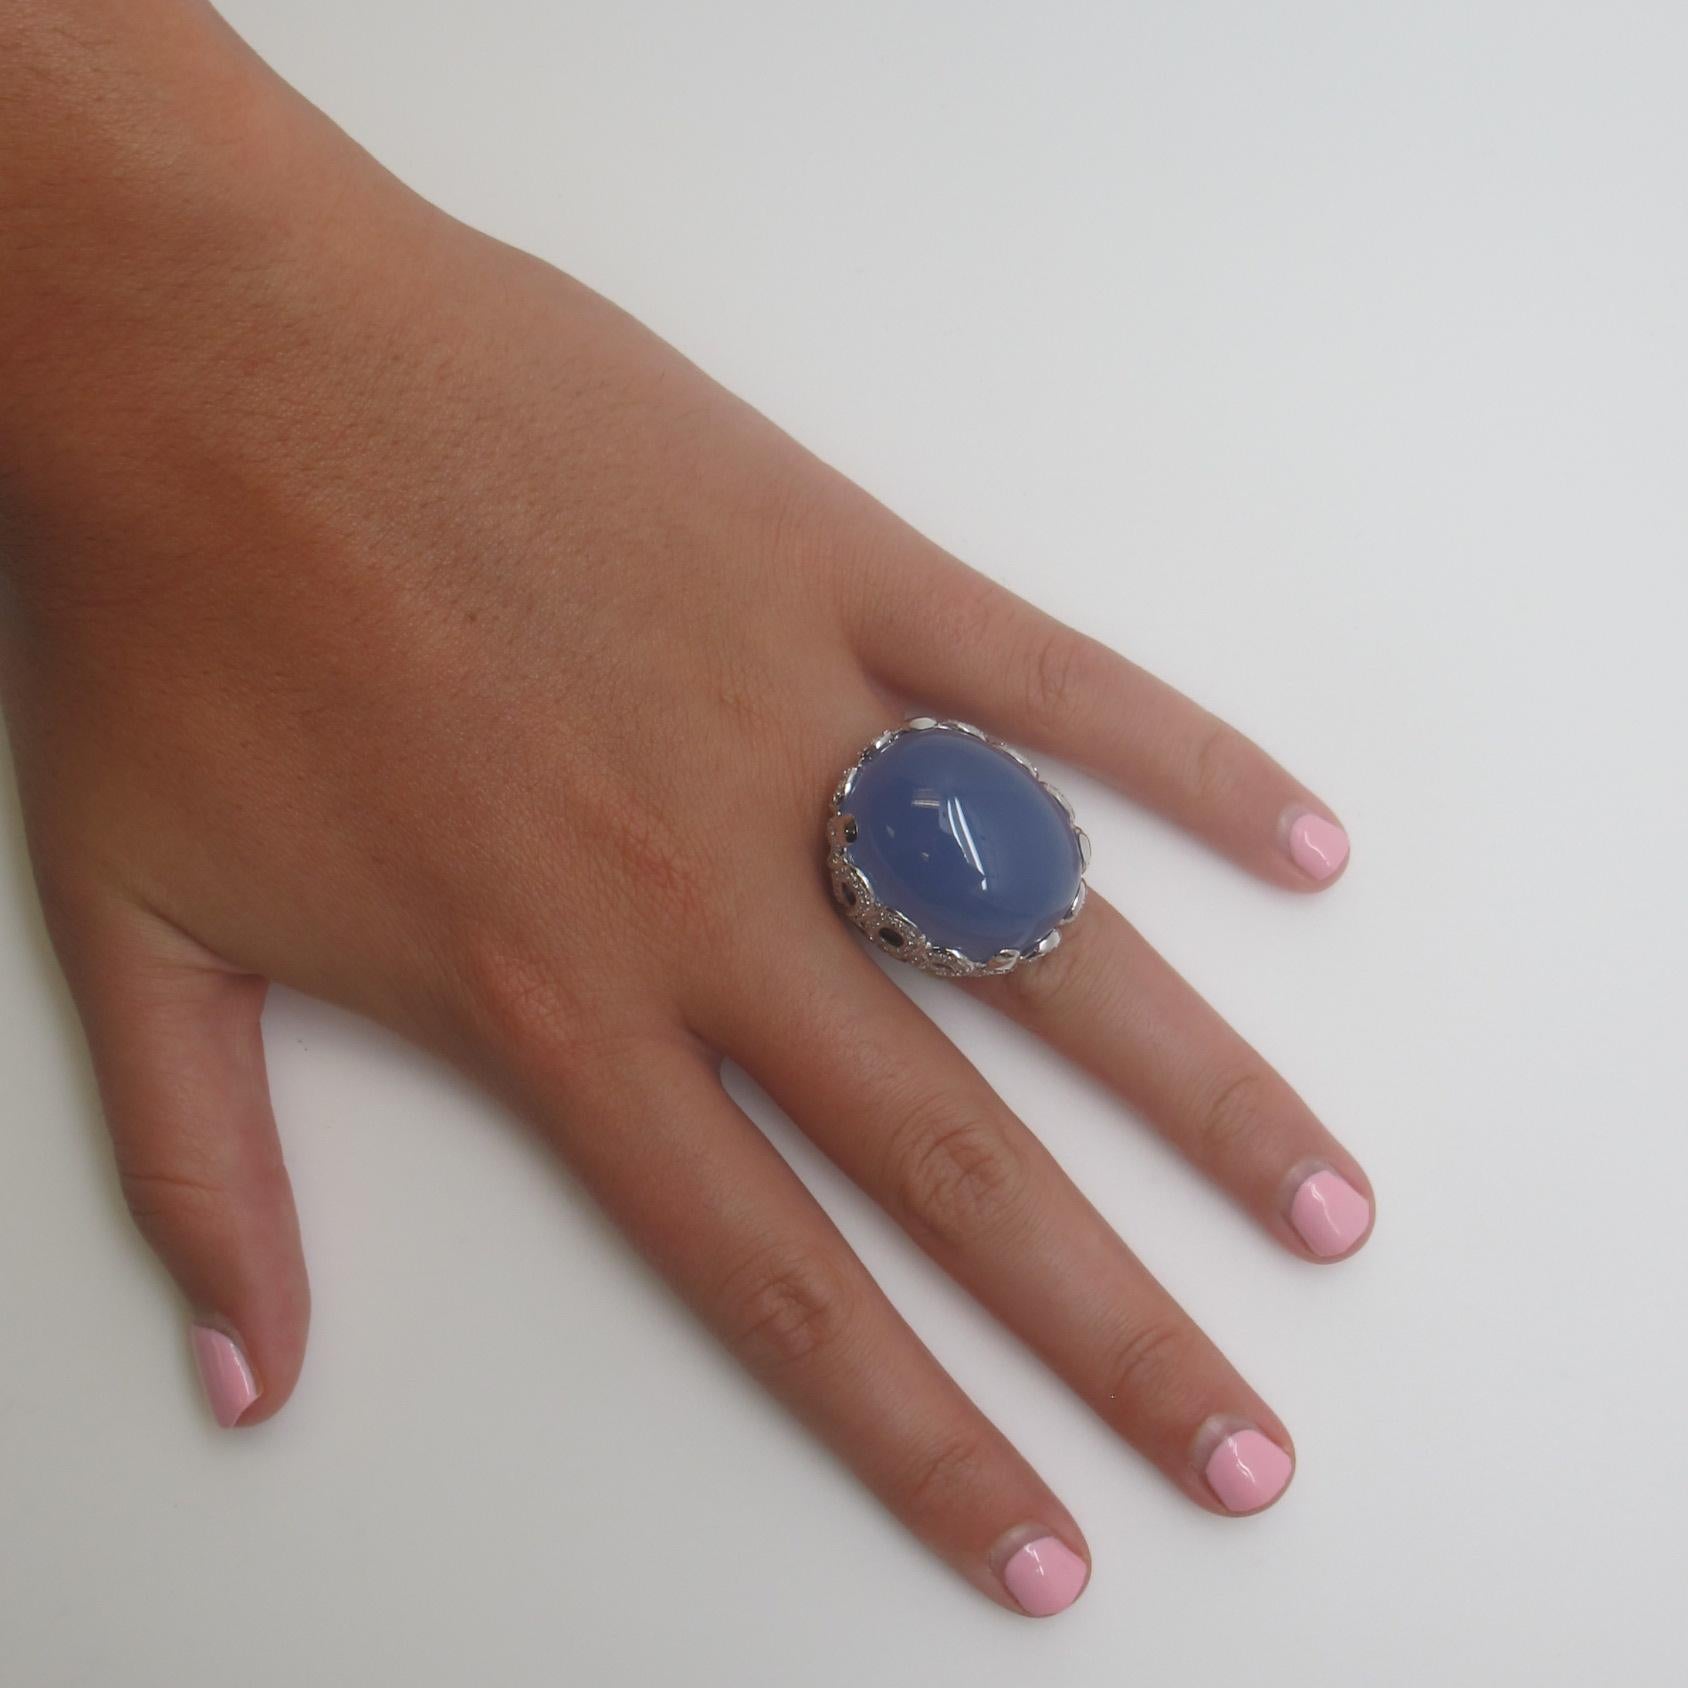 Giant lavendar- blue chalcedony (51.41 carats) and 154 round brilliant cut diamonds (0.73 carats total)  are combined in this beautiful  18k white gold ring.  A lavendar chalcedony cabochon of this size and quality is rare to find. This ring packs a